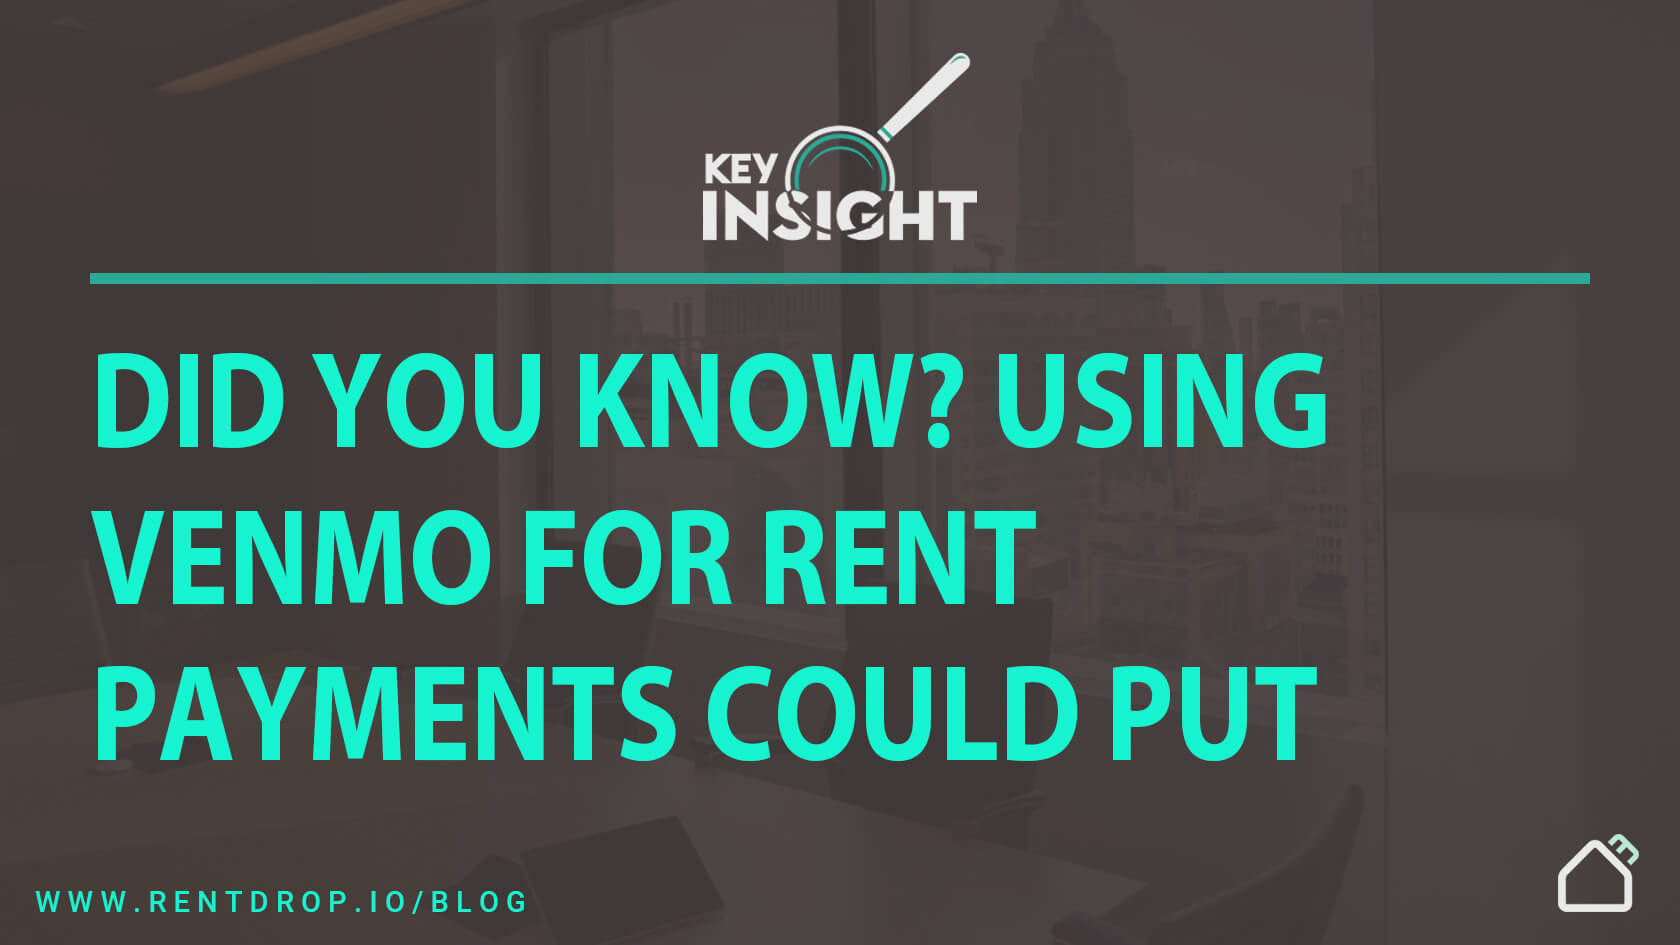 rent payment apps like venmo insight rentdrop